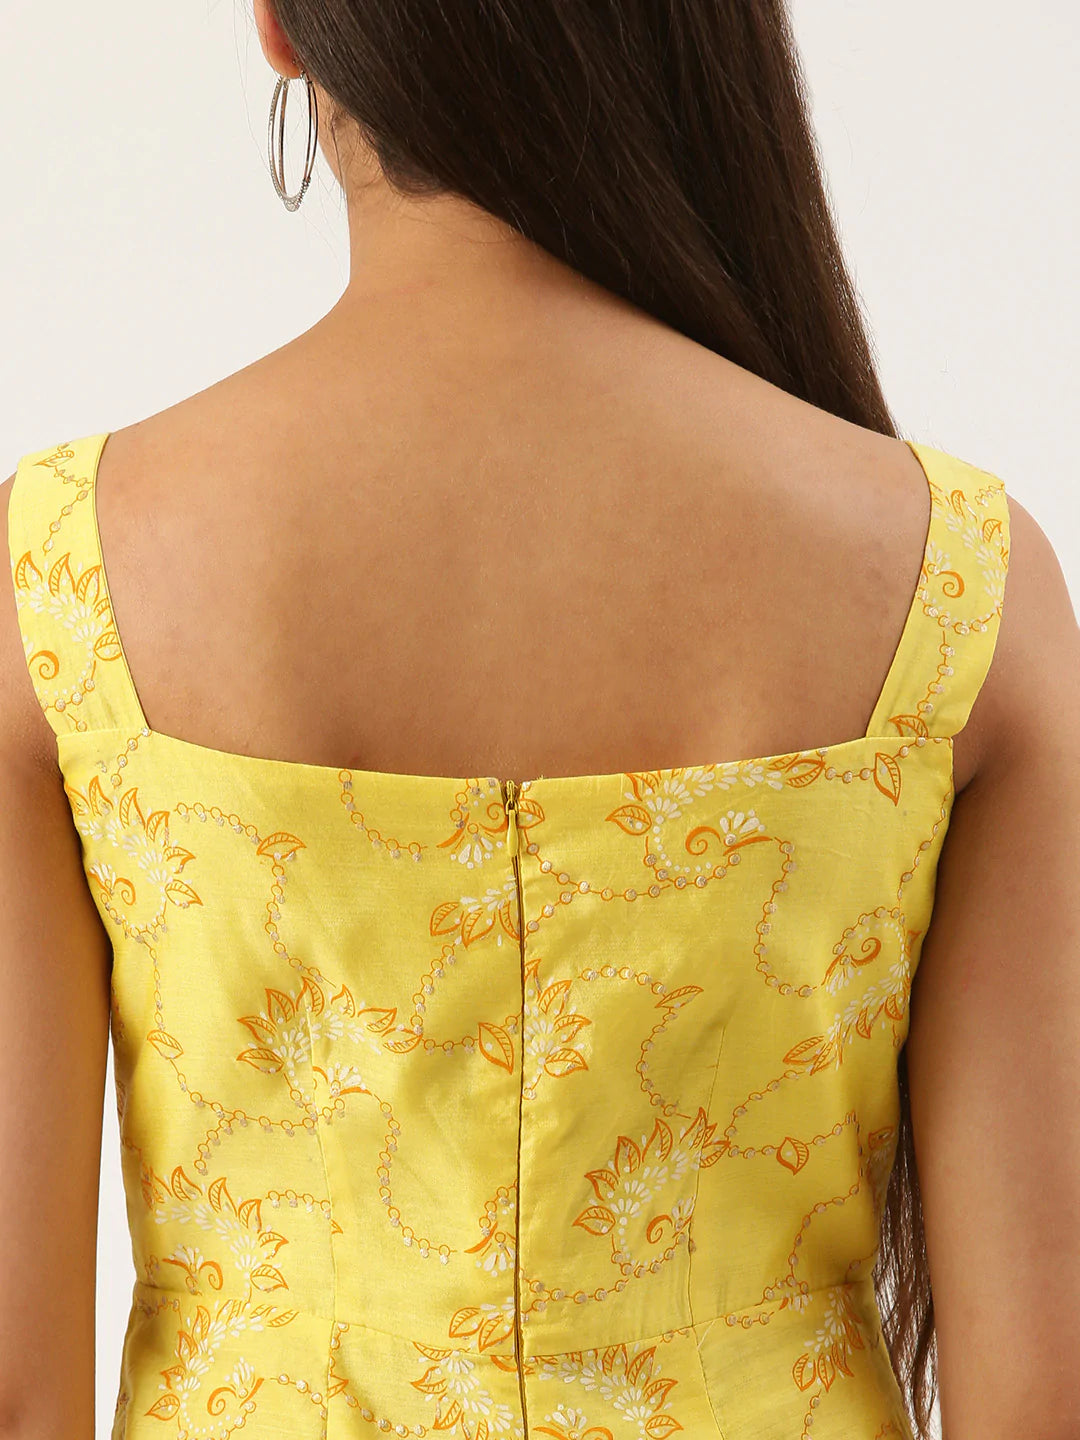 Yellow-Foil-Printed-Jumpsuit